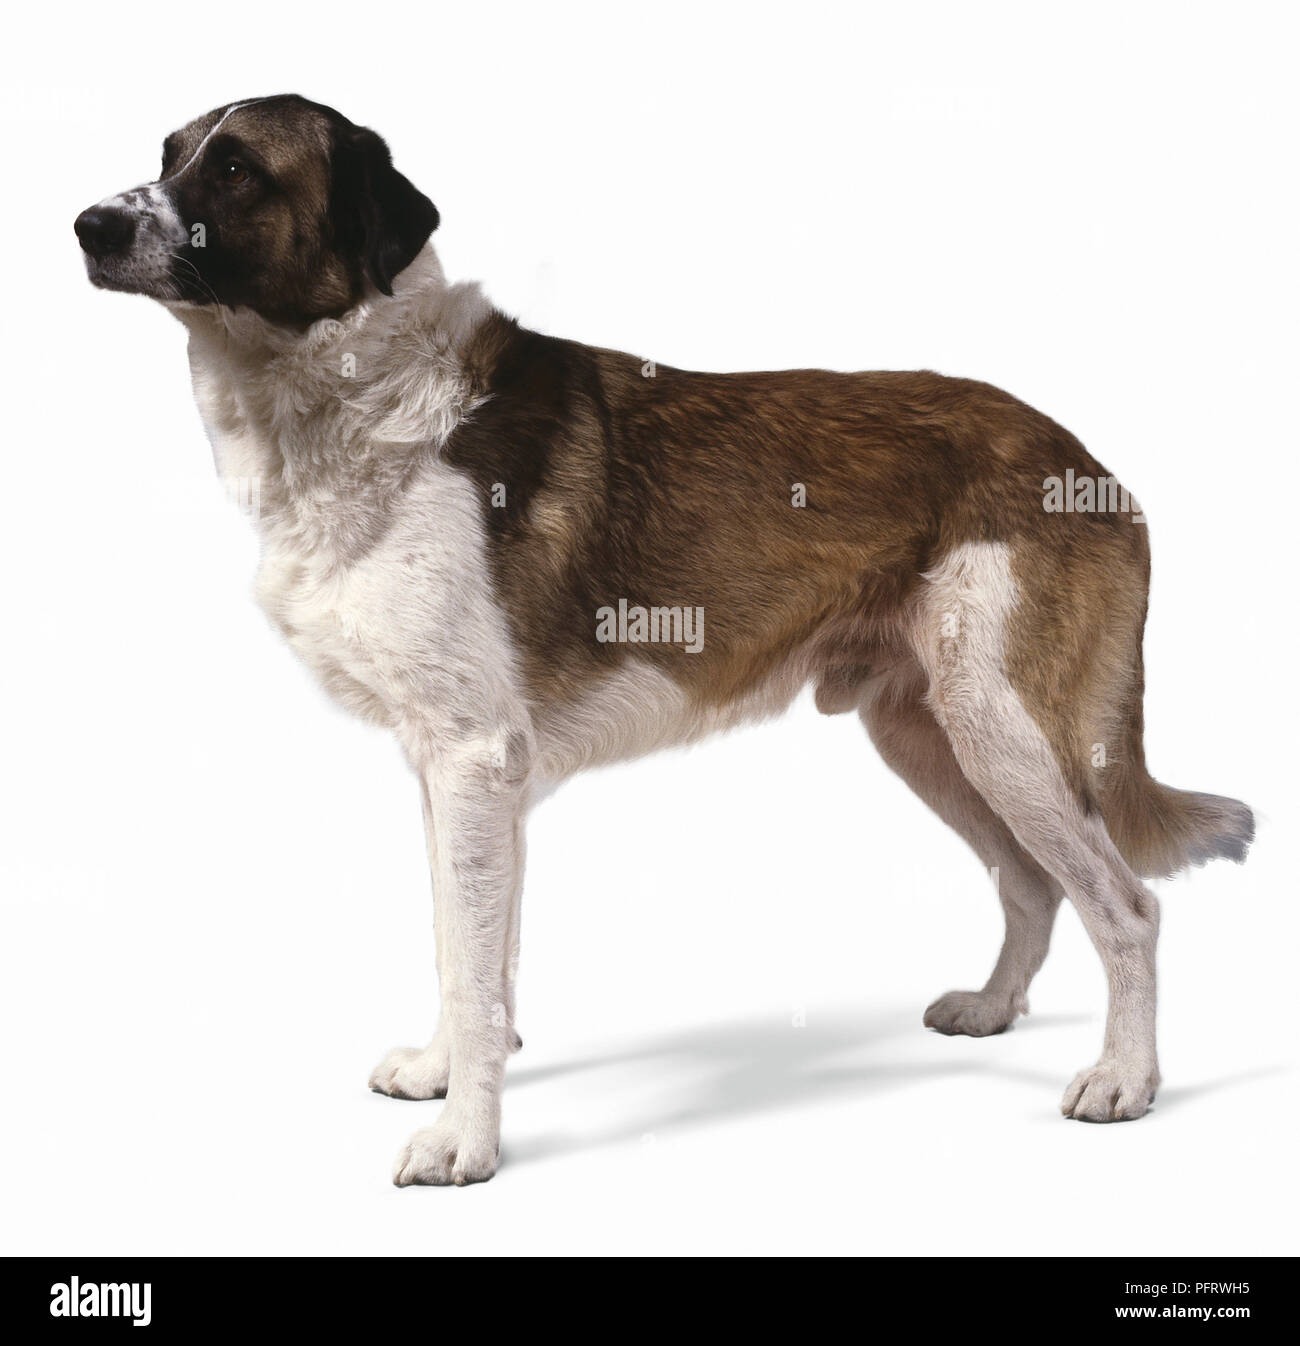 Rafeiro Do Alentejo or Portuguese Watchdog, brown and white dog, standing, side view Stock Photo